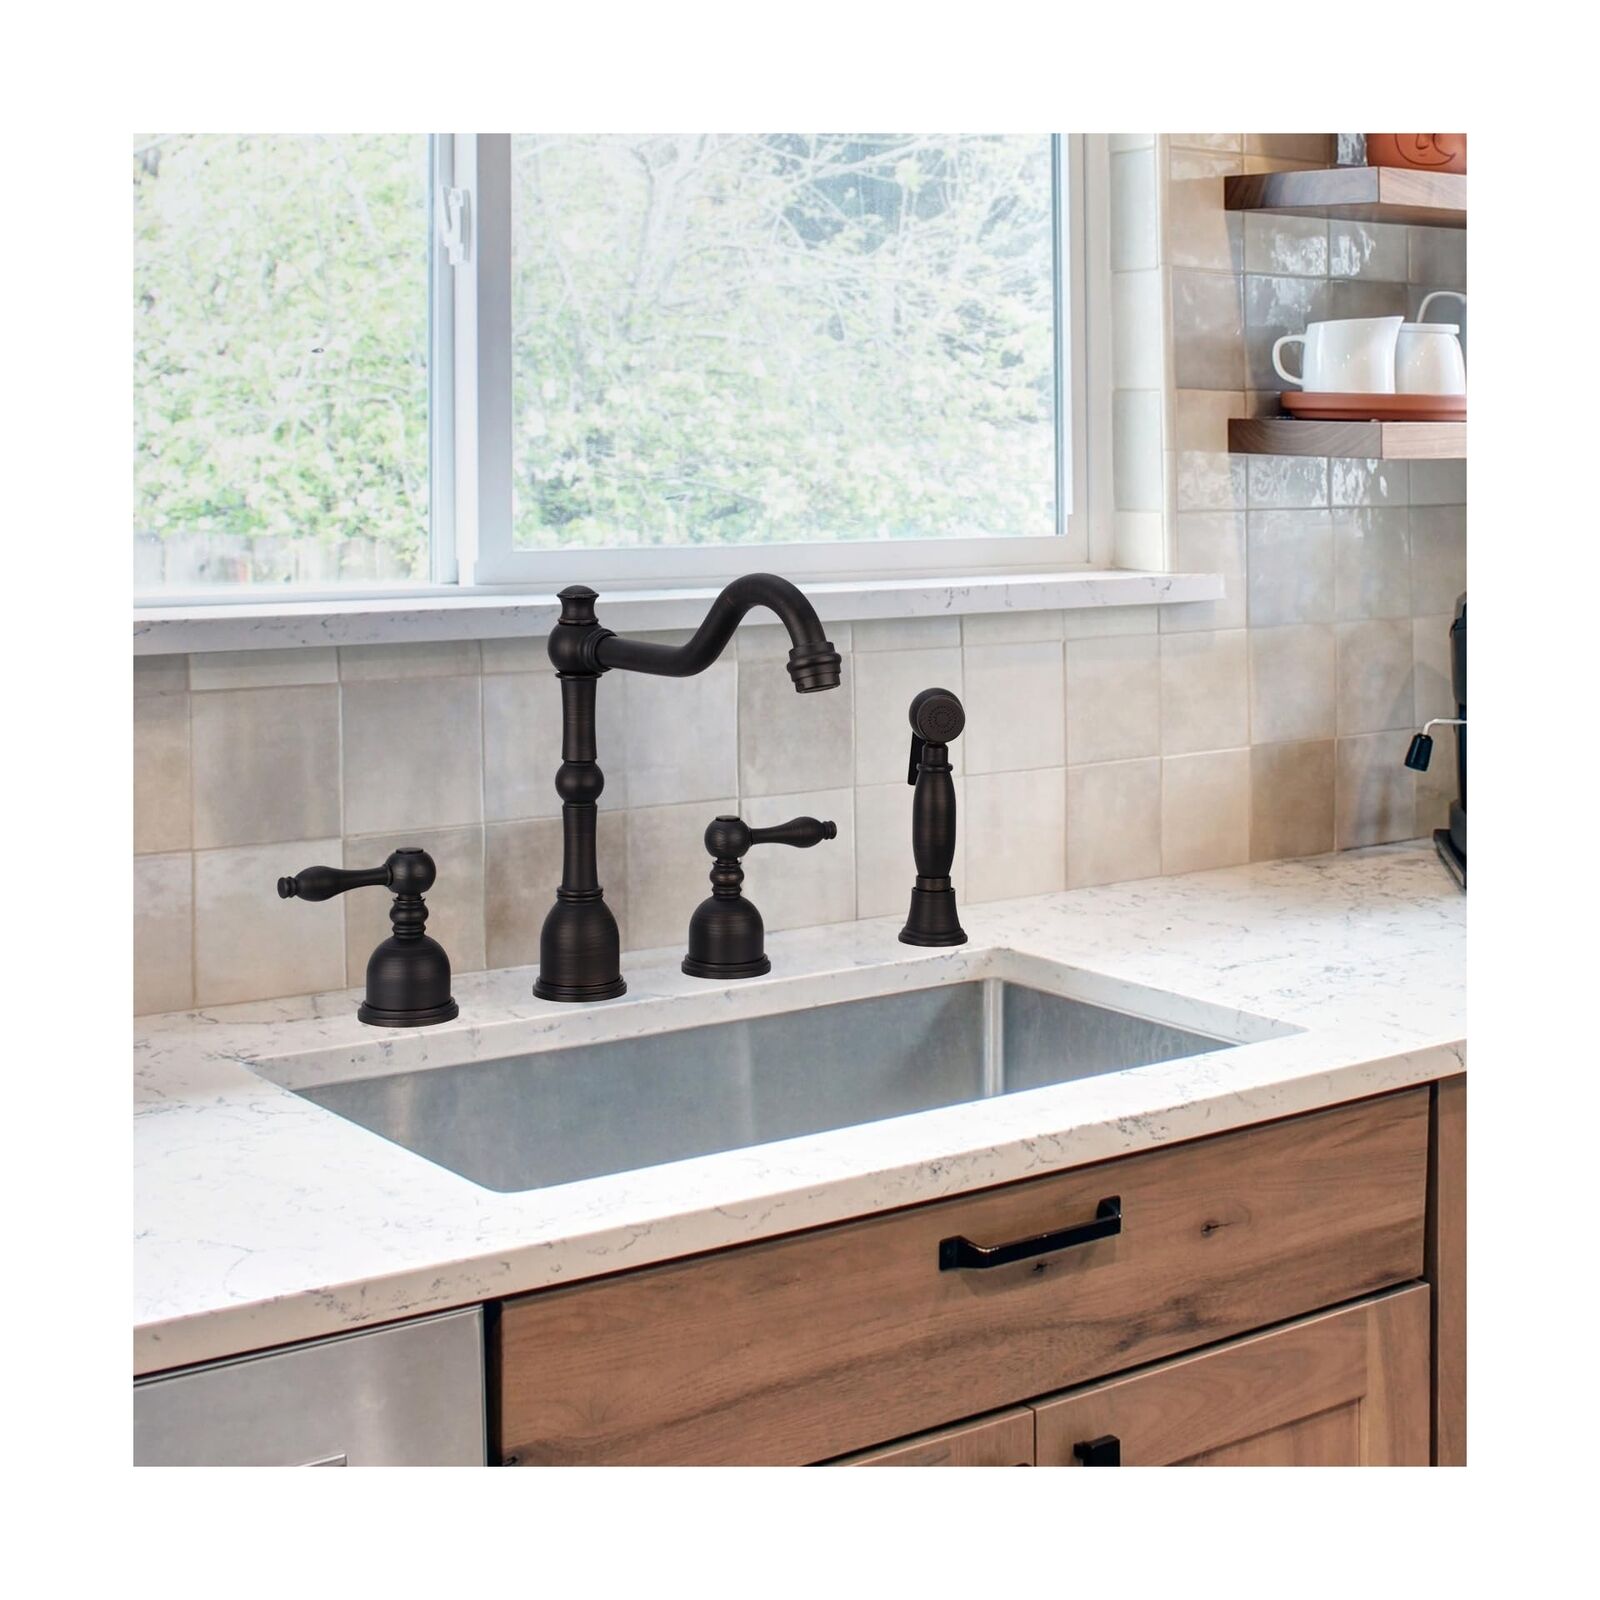 thinkstar Two-Handles Widespread Kitchen Faucet With Side Sprayer (Oil Rubbed Br...